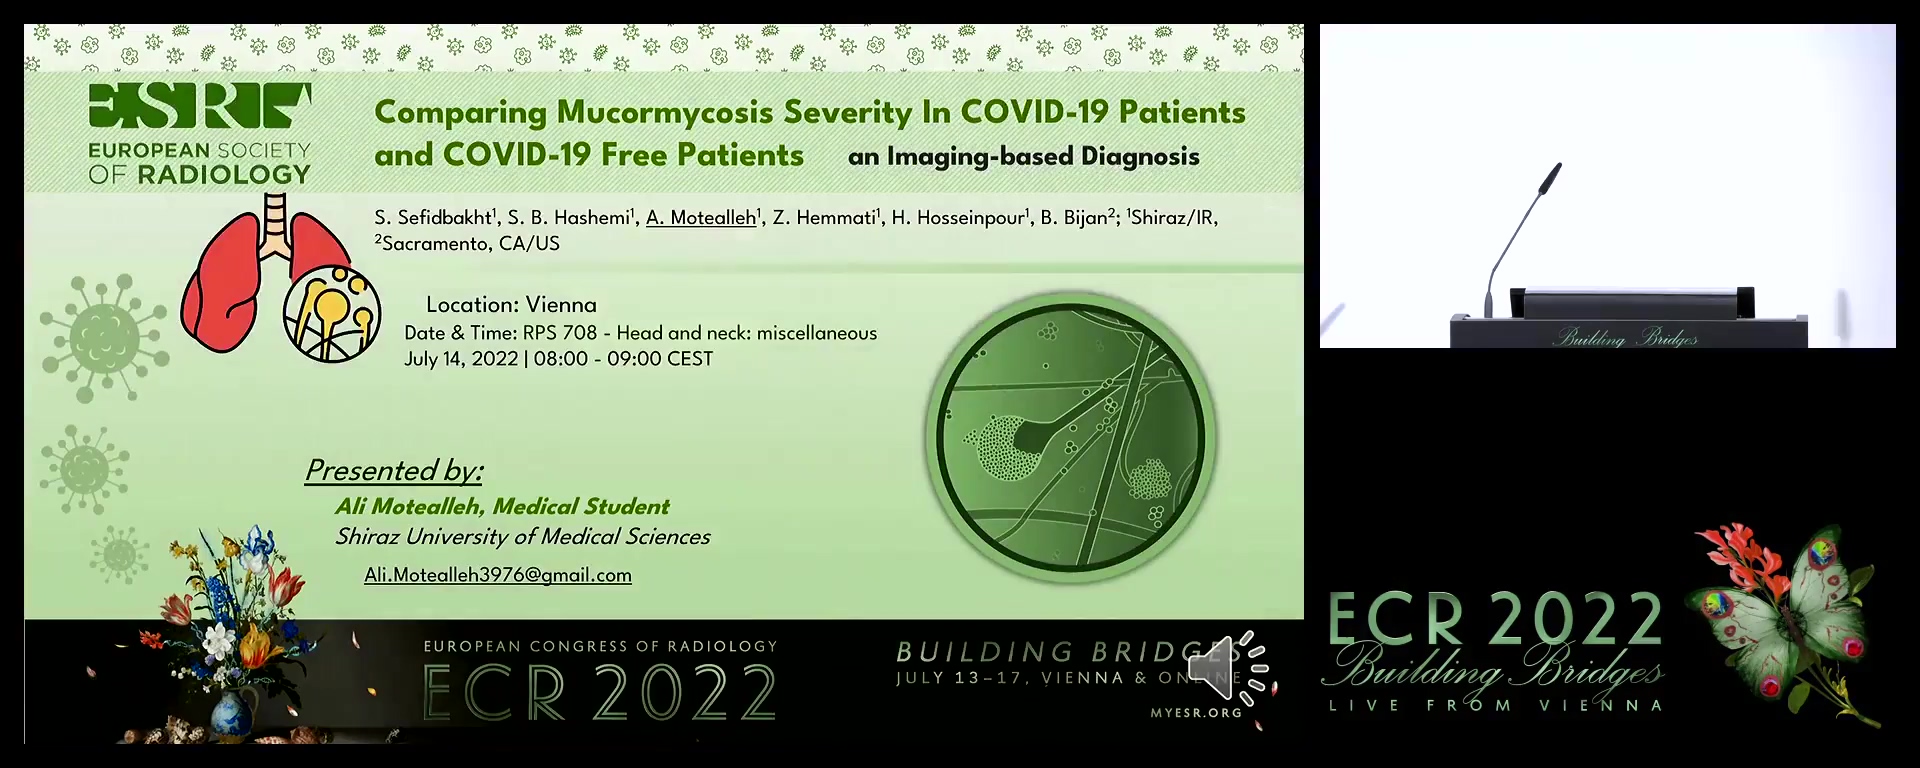 Comparing mucormycosis severity in COVID-19 patients and COVID-19 free patients: an imaging-based diagnosis